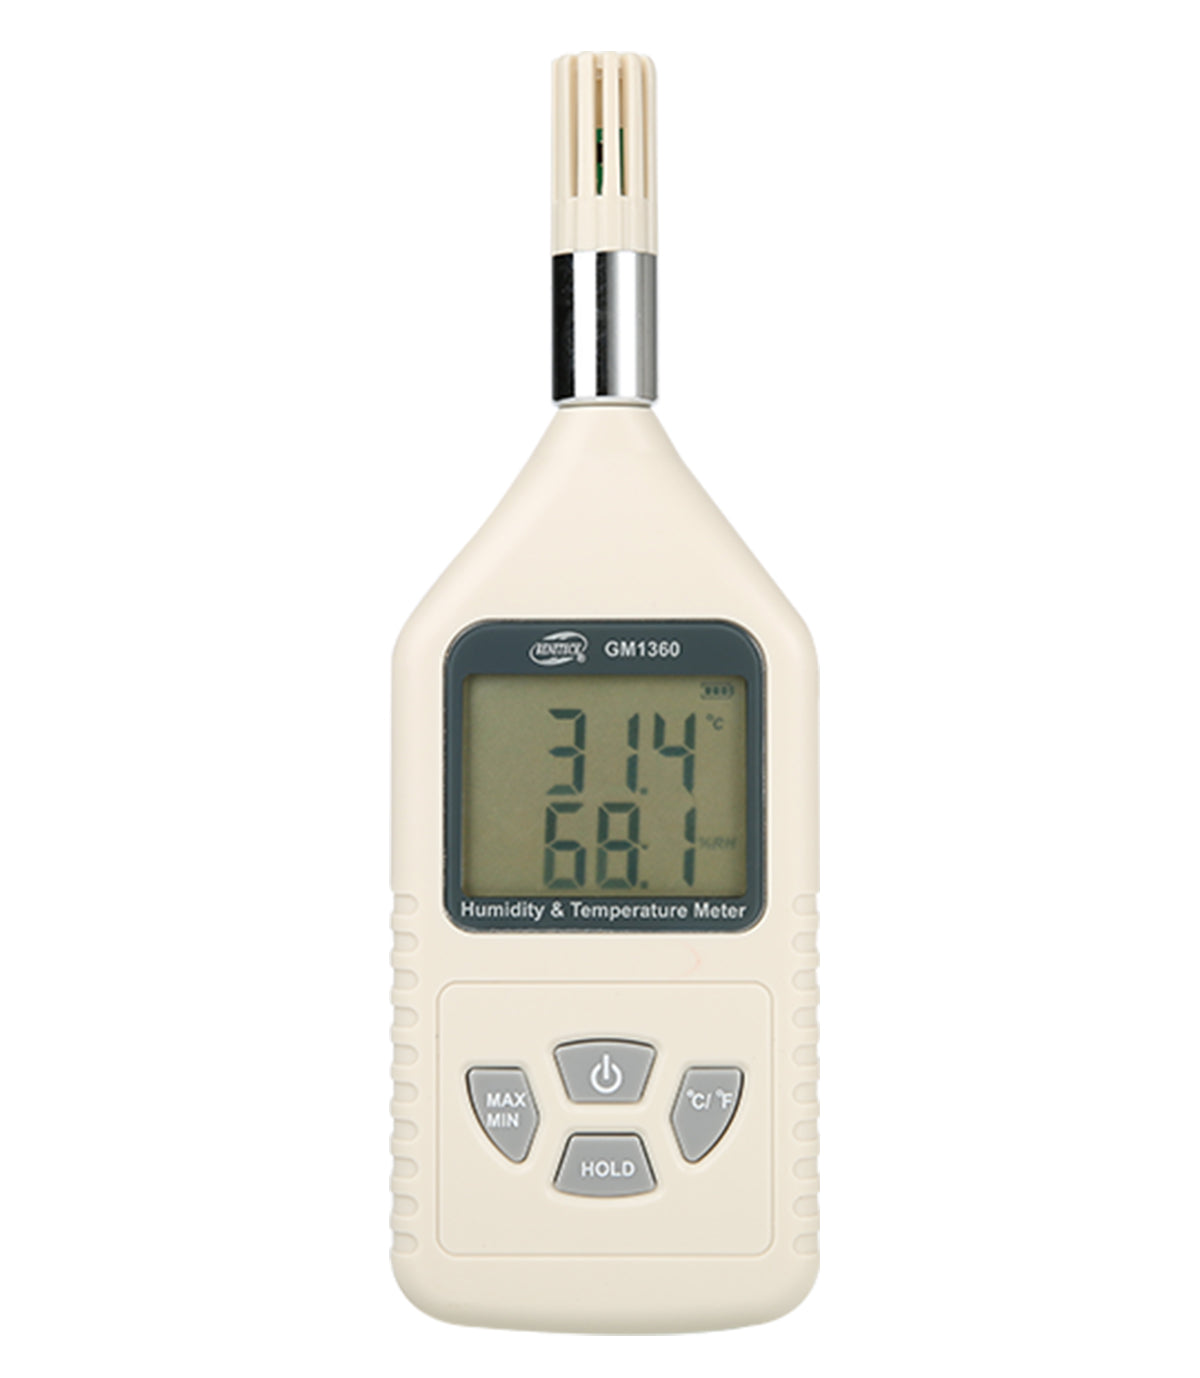 Brando TEMPer Hum USB Hygrometer and Thermometer - The Gadgeteer